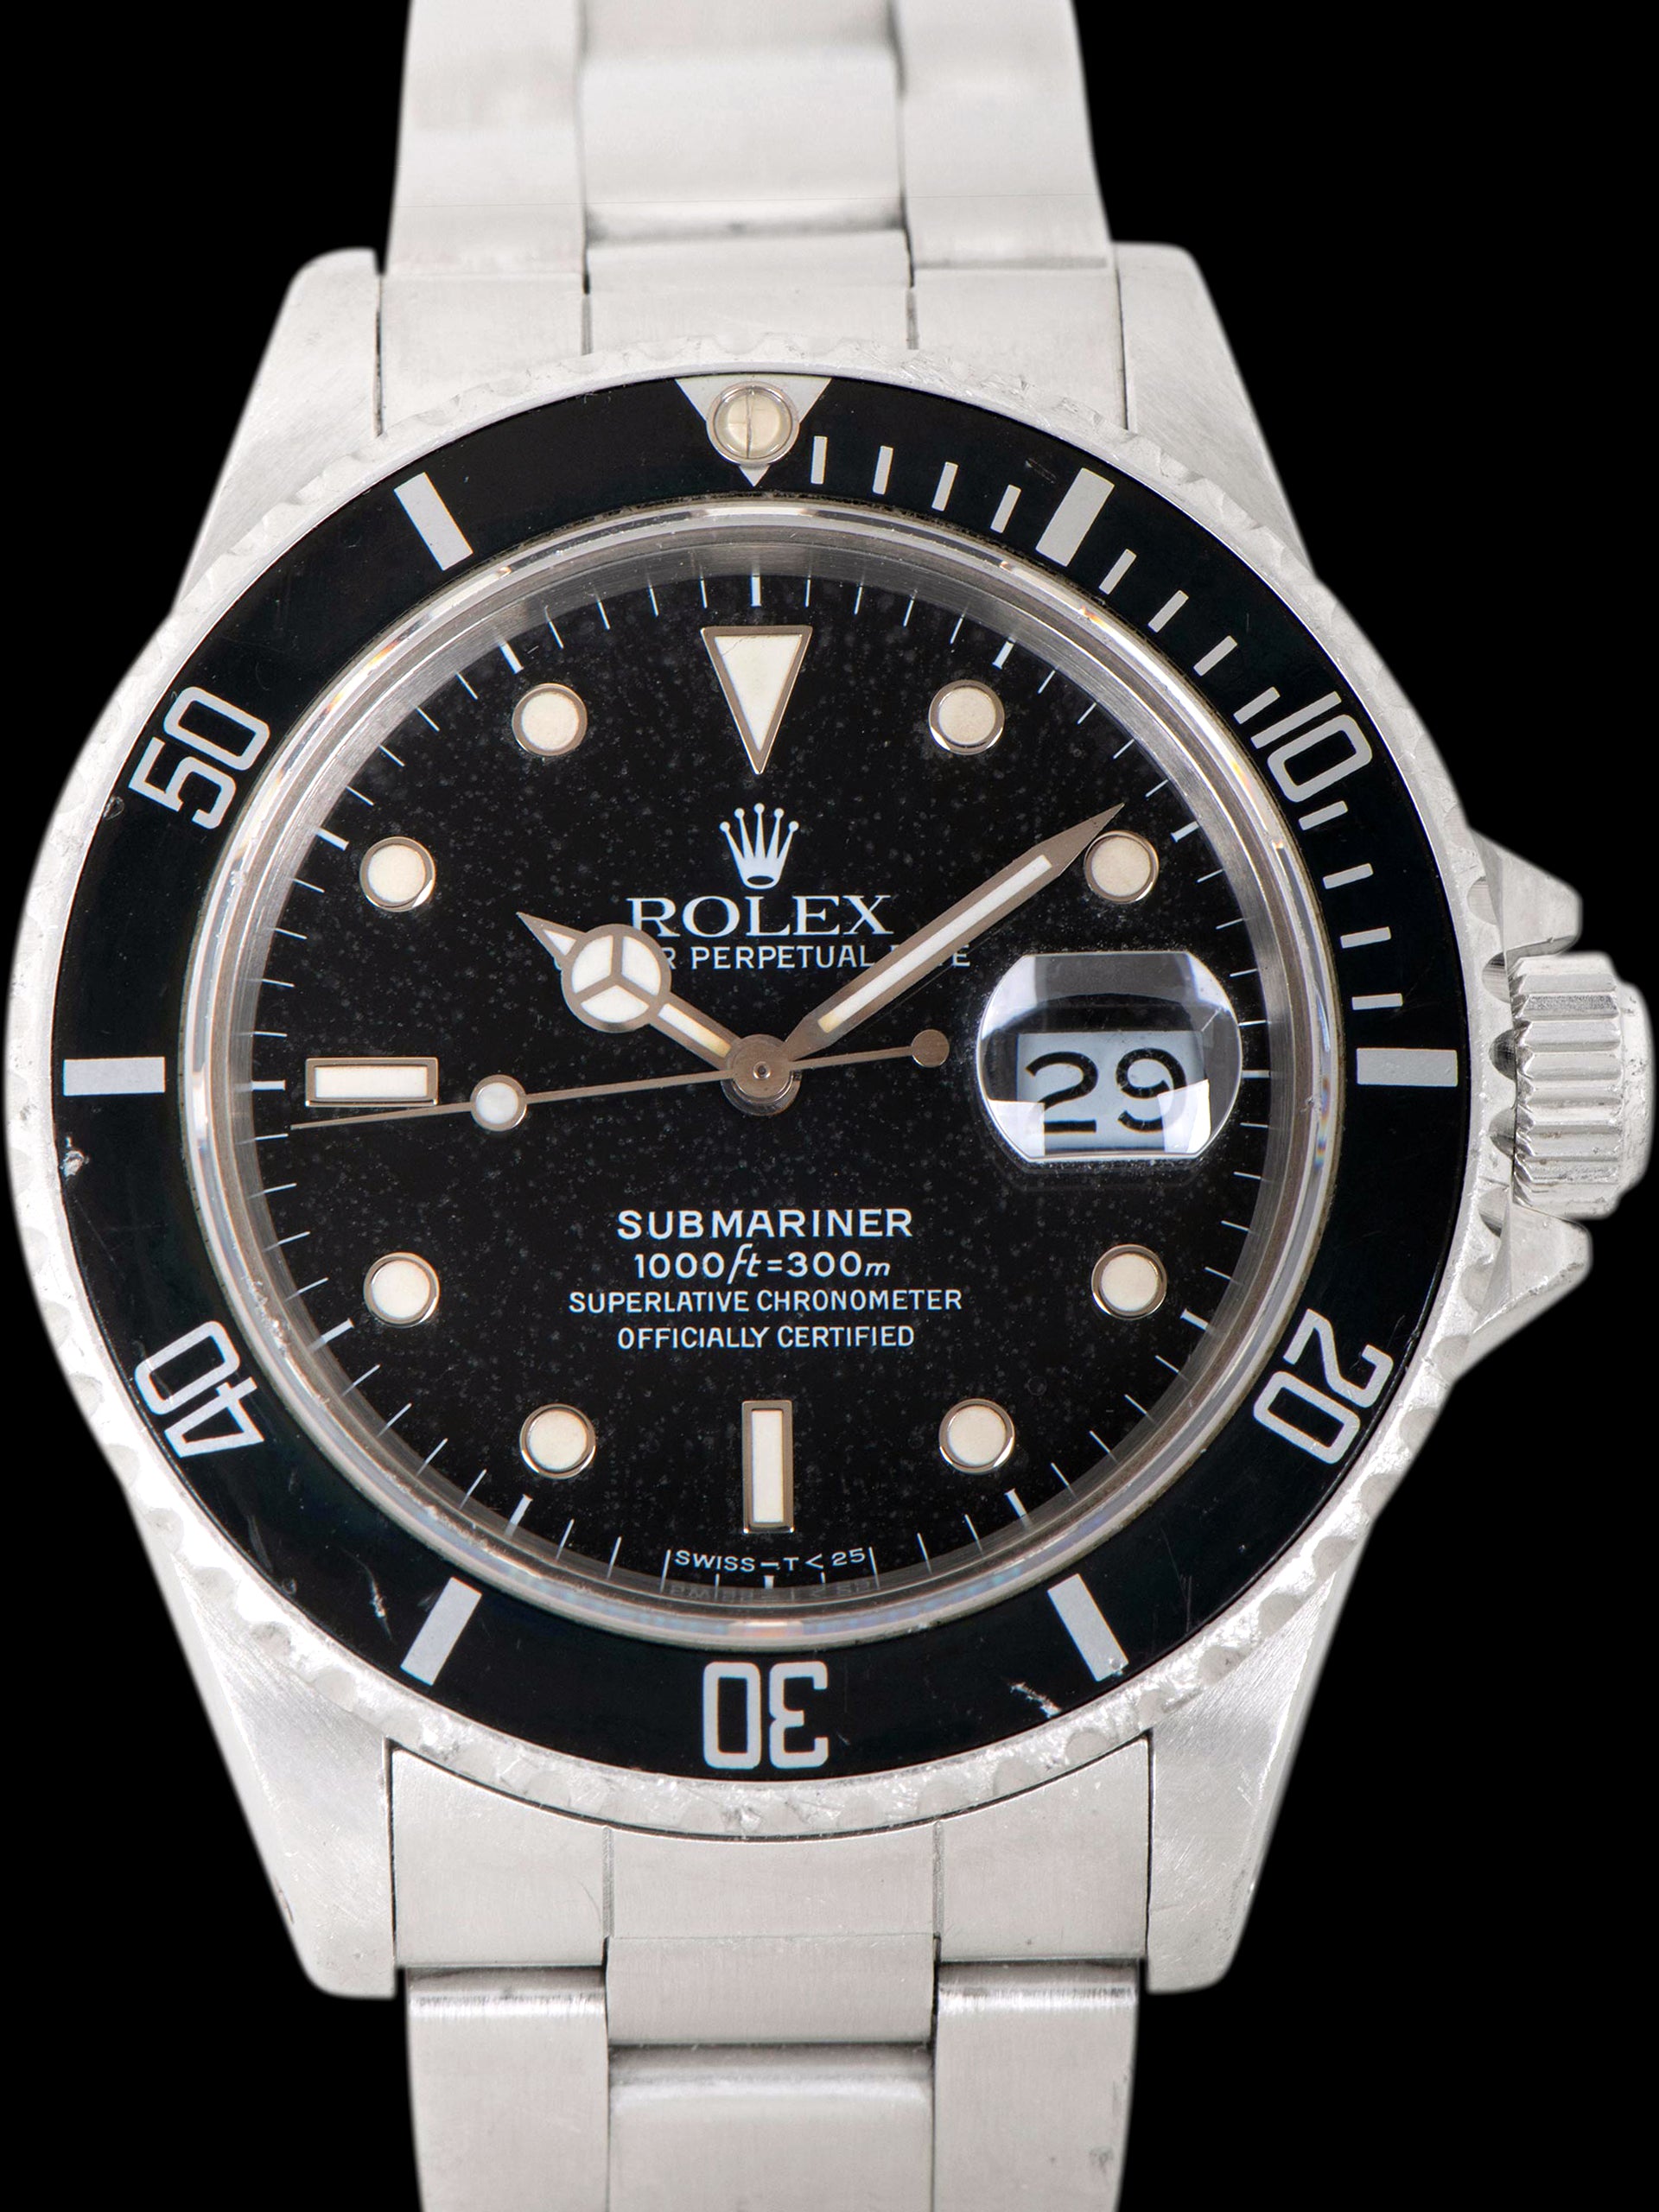 1988 Rolex Submariner (Ref. 168000) "Triple 0" W/ Box & Papers